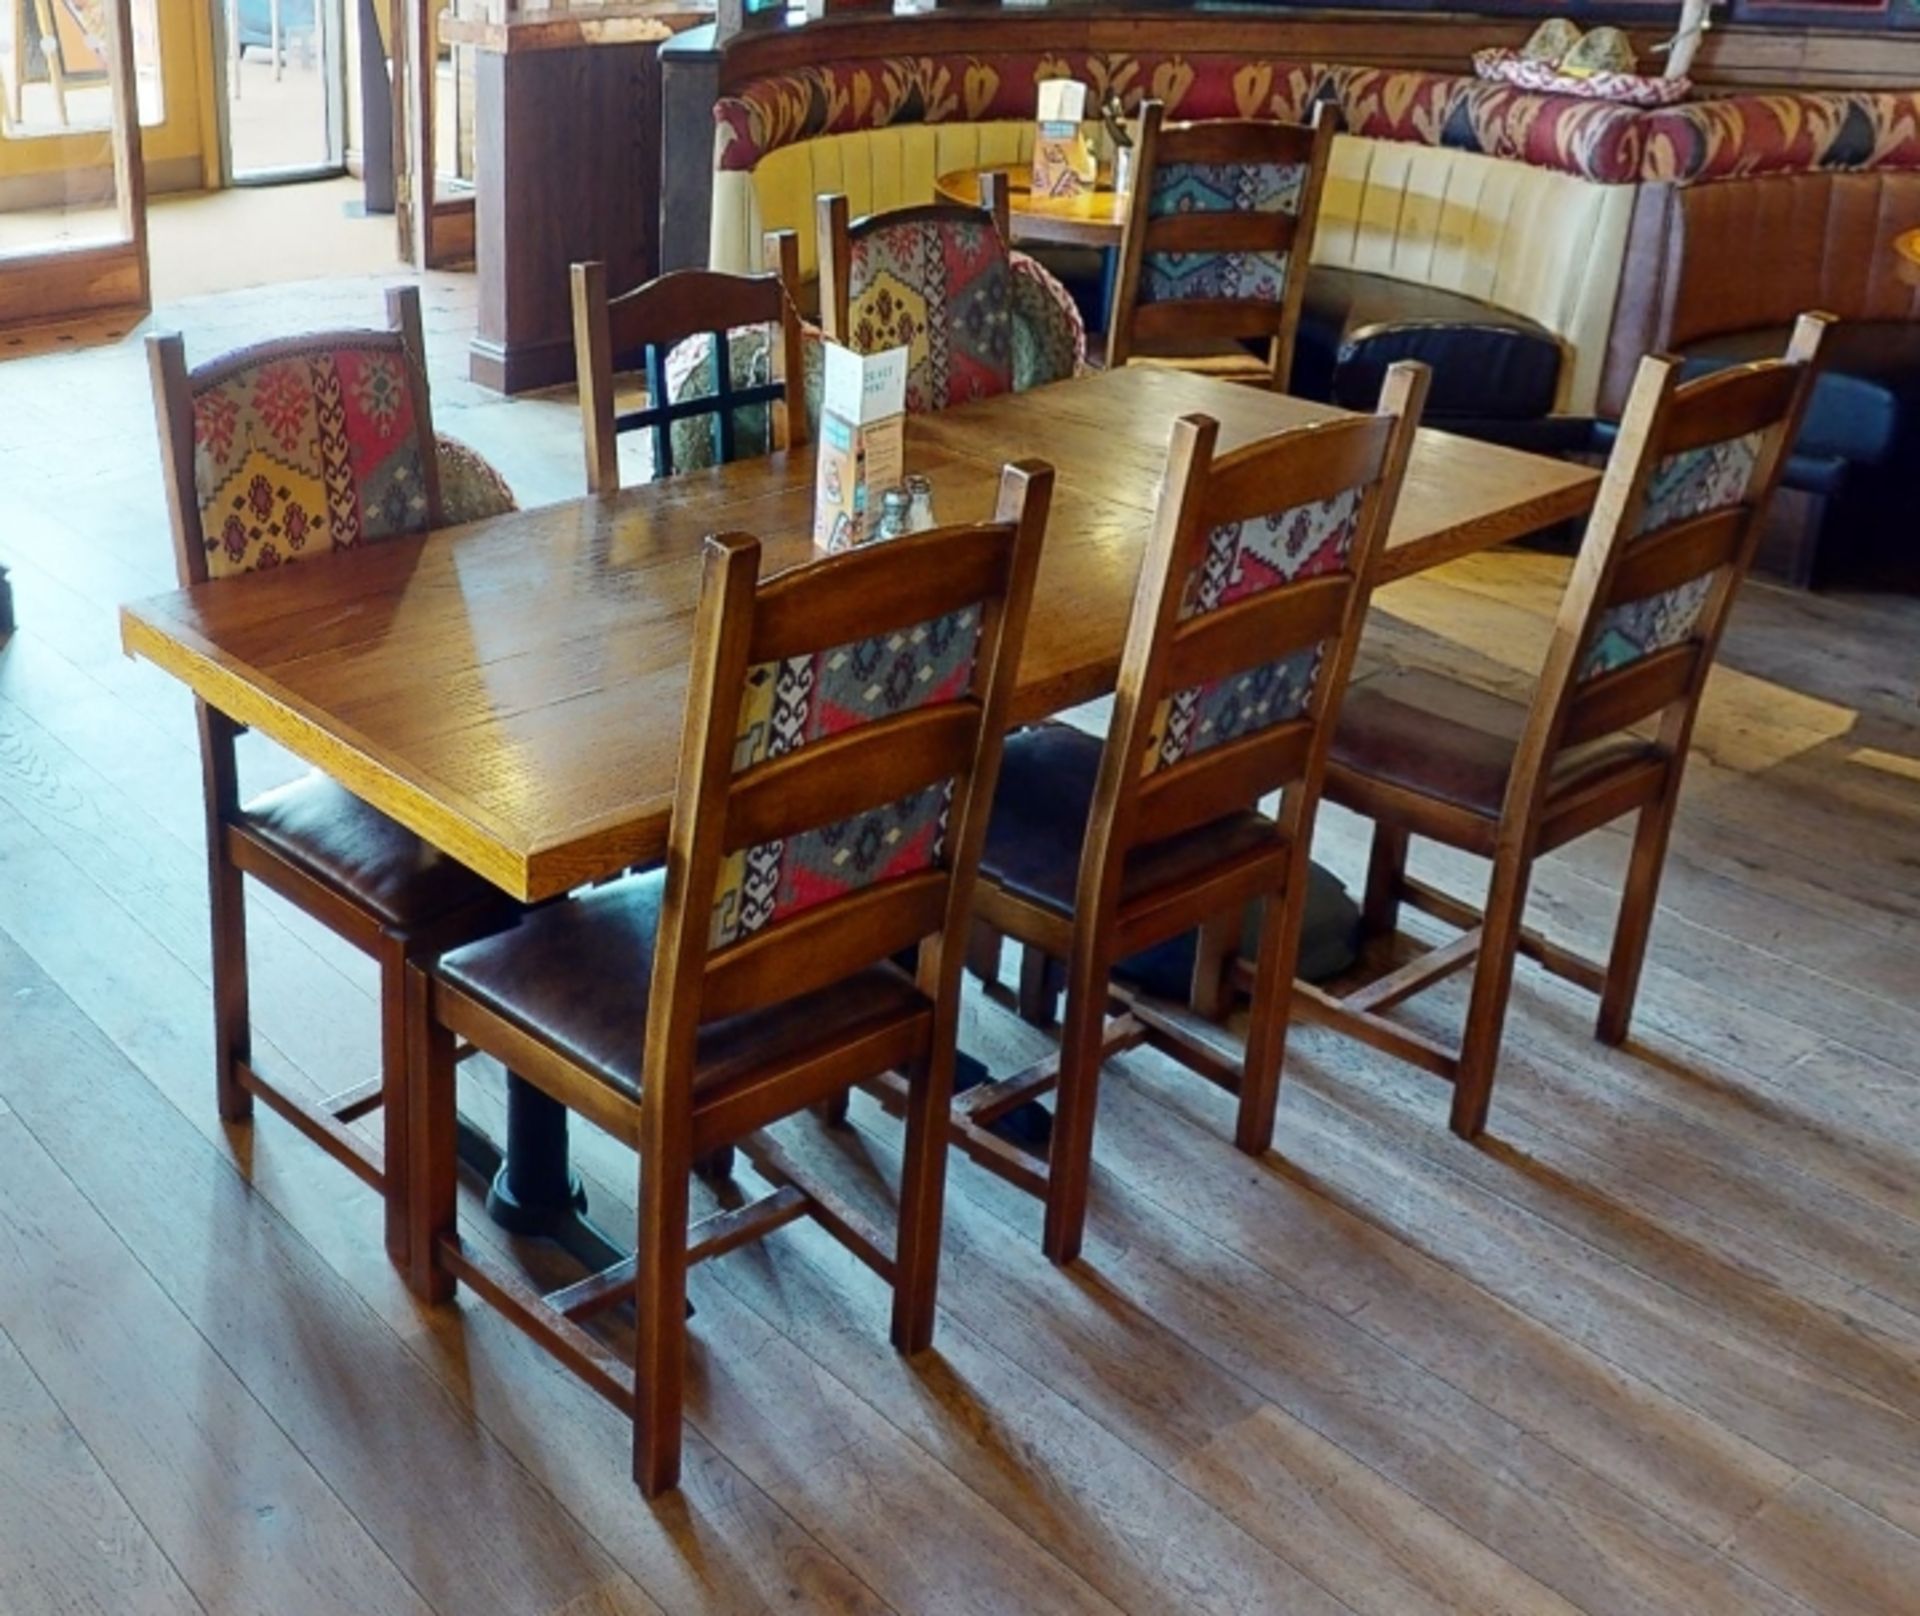 15 x Restaurant High Back Dining Chairs With Faux Leather Brown Seat Pads and Mexican Inspired - Image 8 of 11